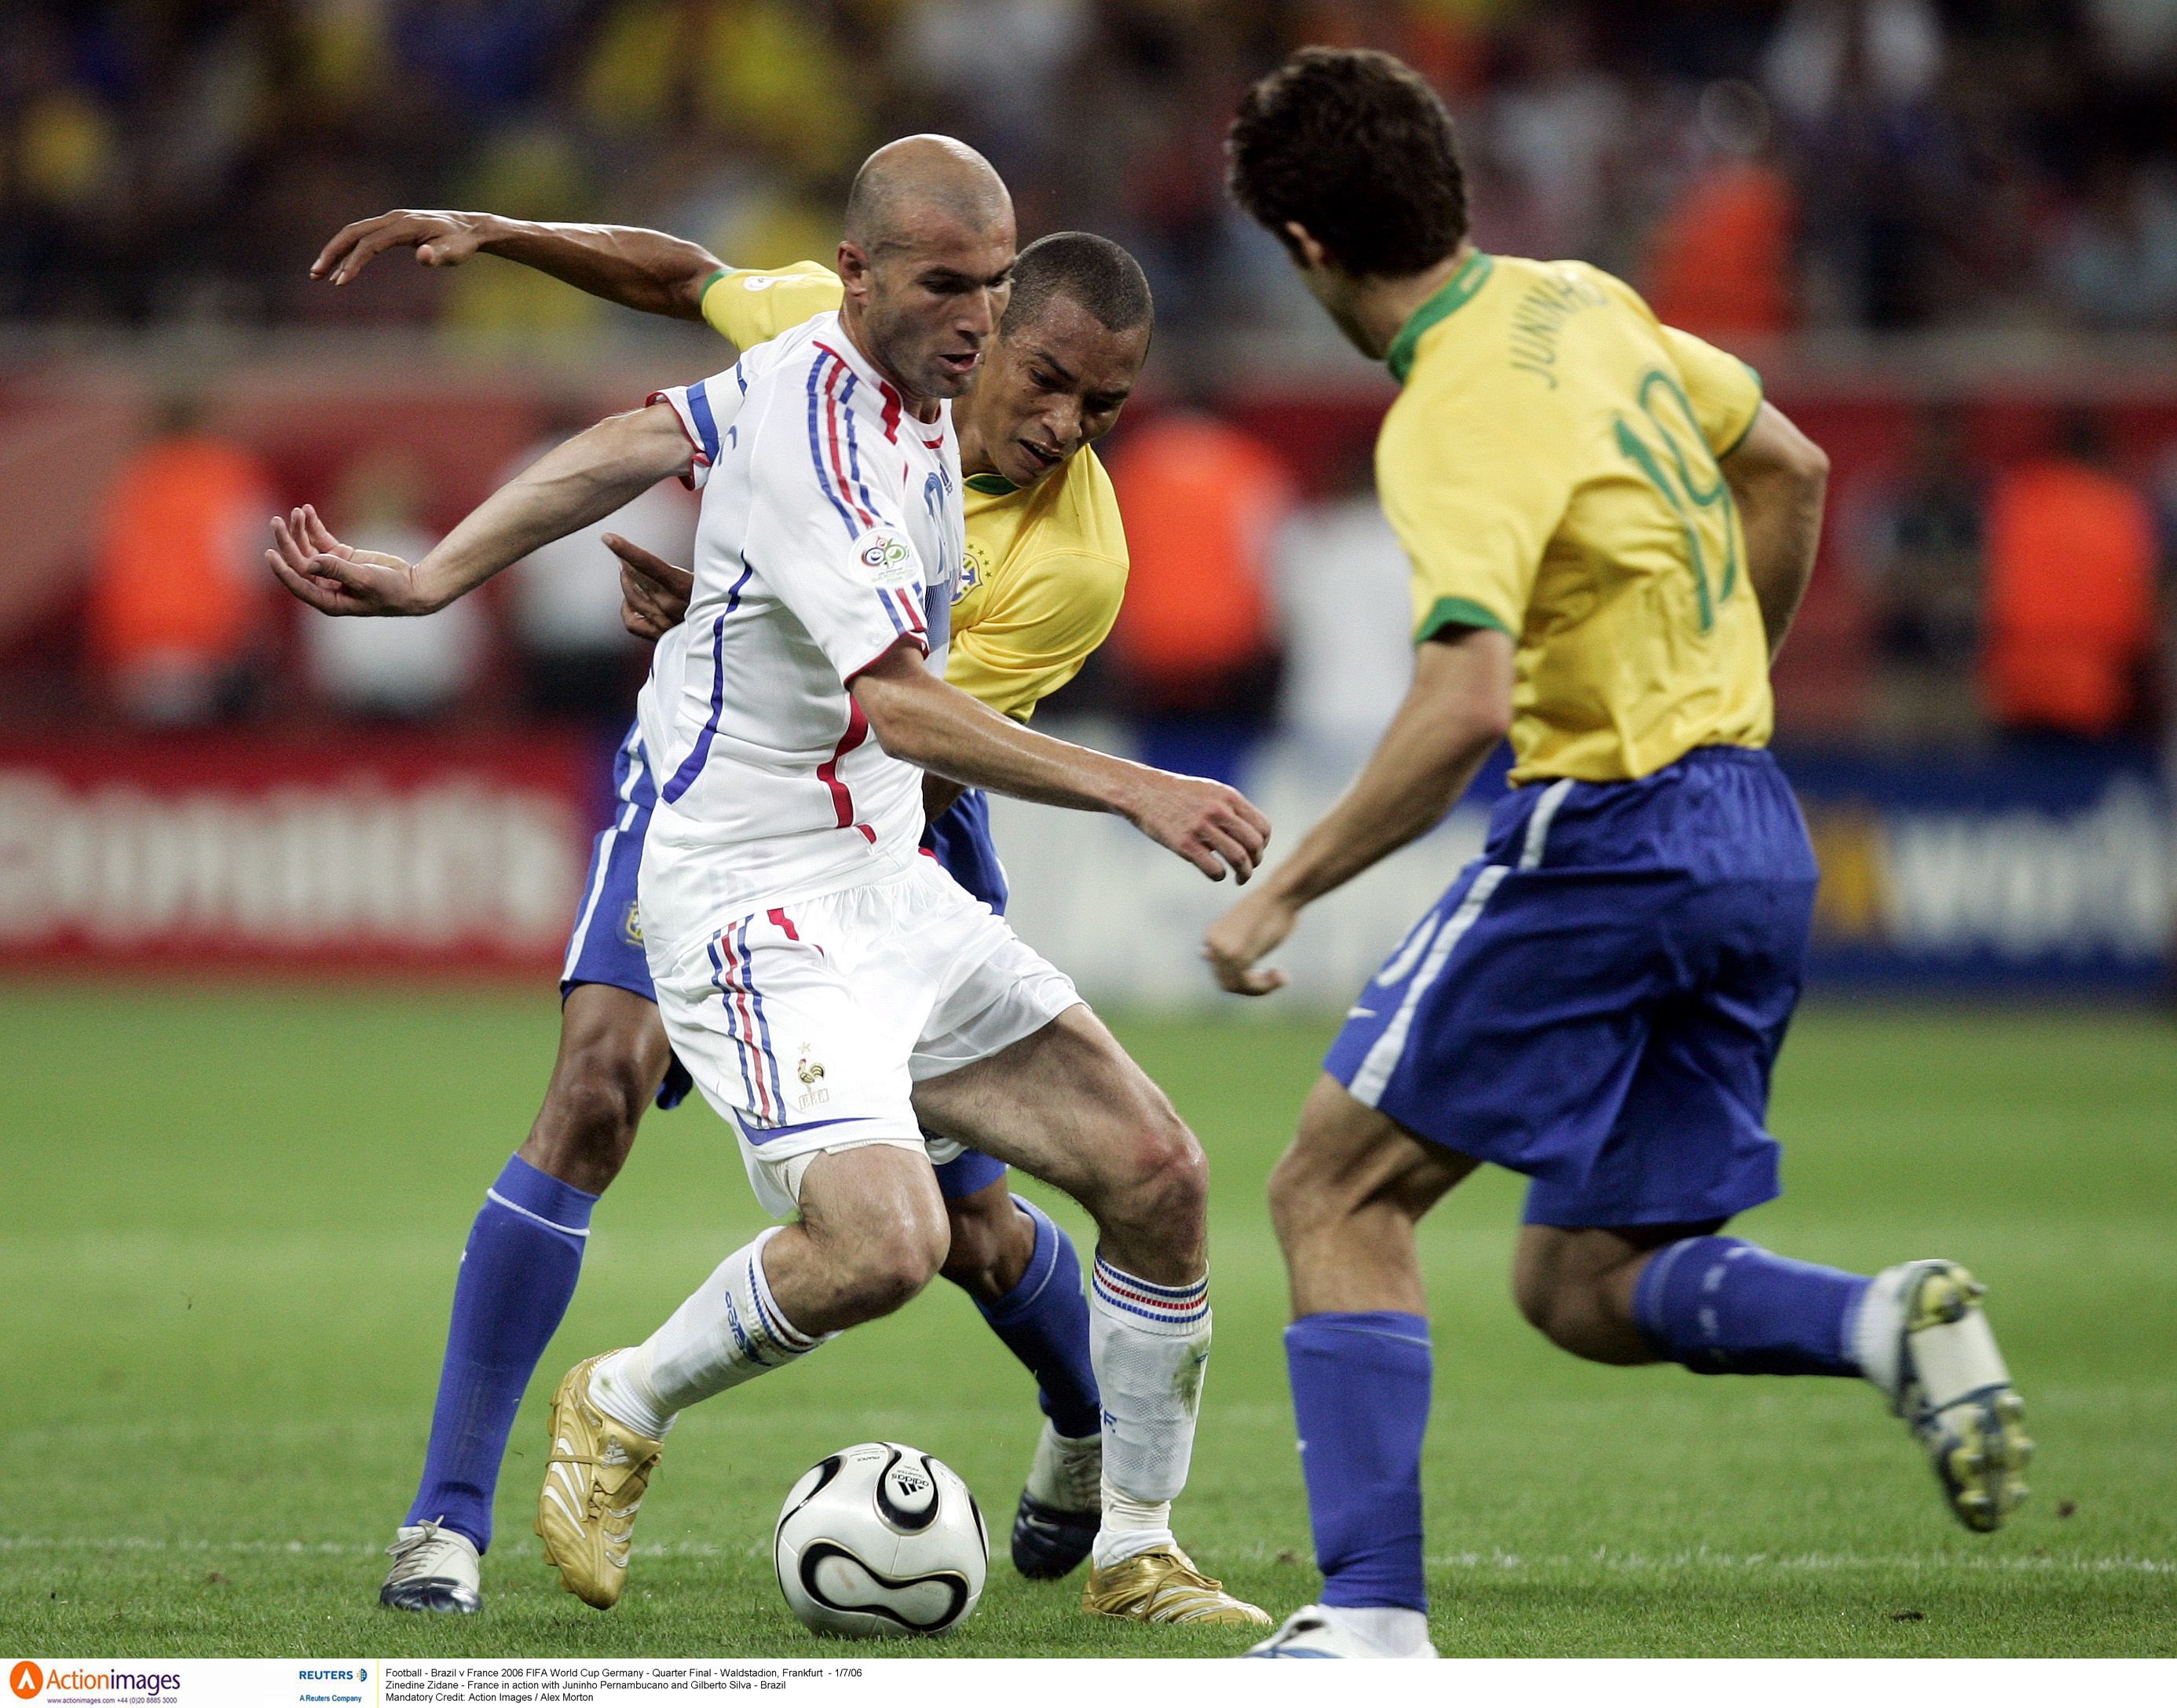 Zinedine Zidane in action for France vs Brazil at 2006 World Cup